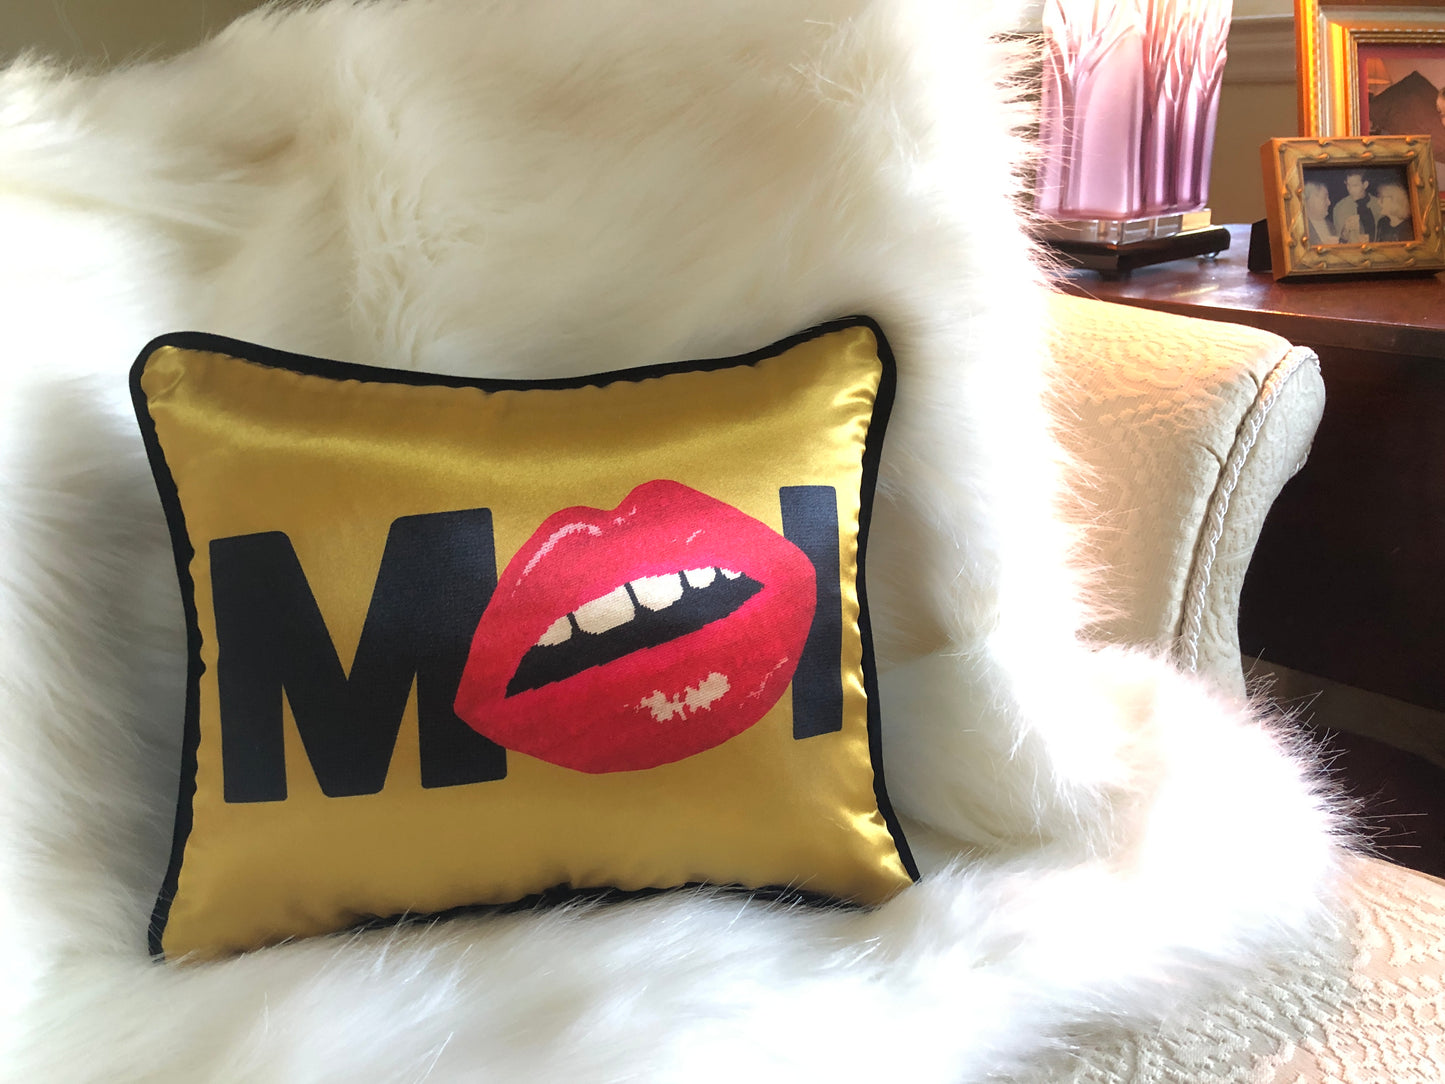 gold satin pillow with MOI written in black, red lips replacing the O. Shown on white faux fur throw.